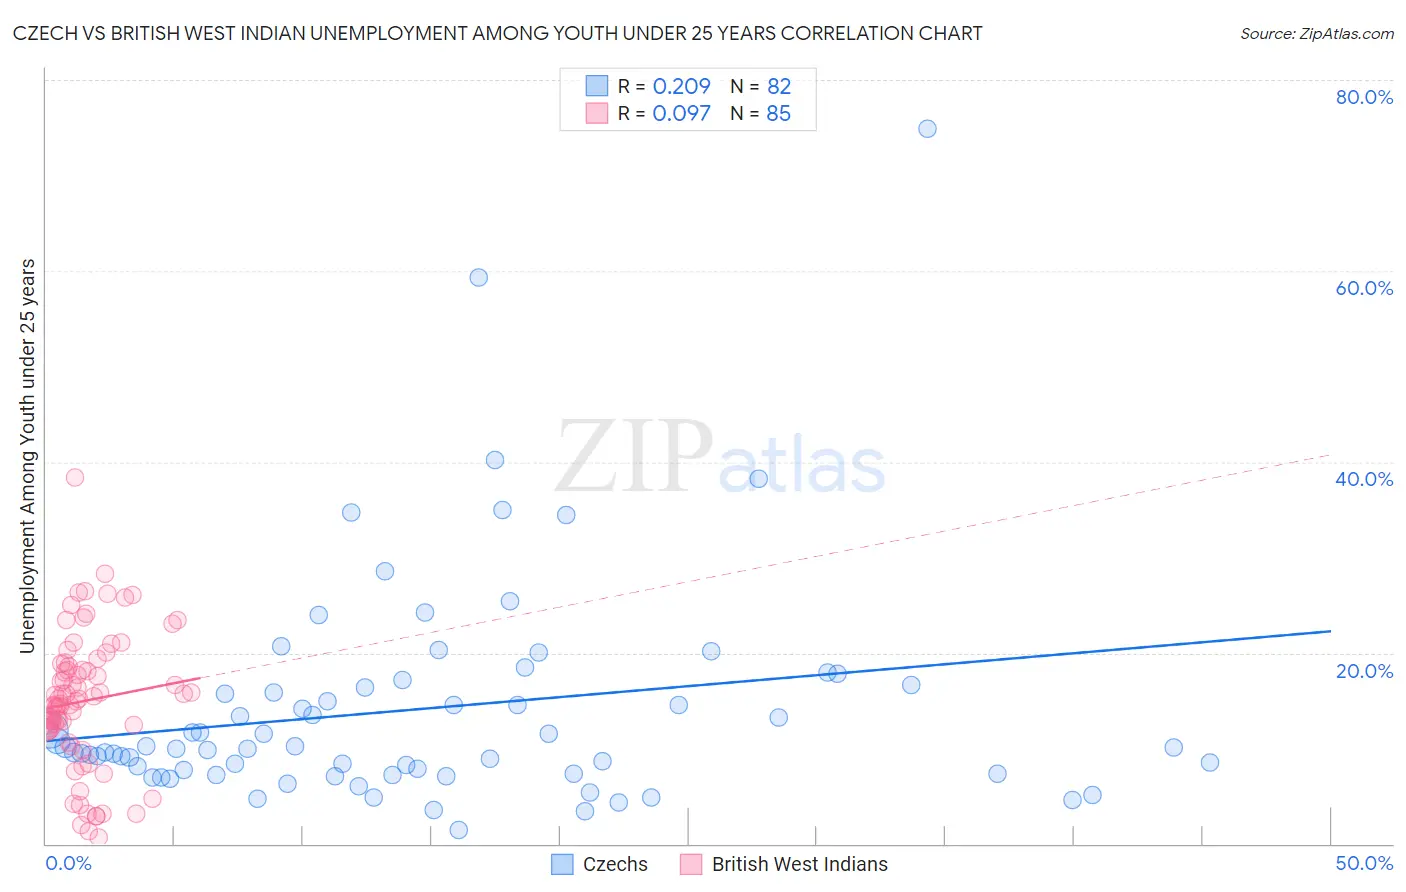 Czech vs British West Indian Unemployment Among Youth under 25 years